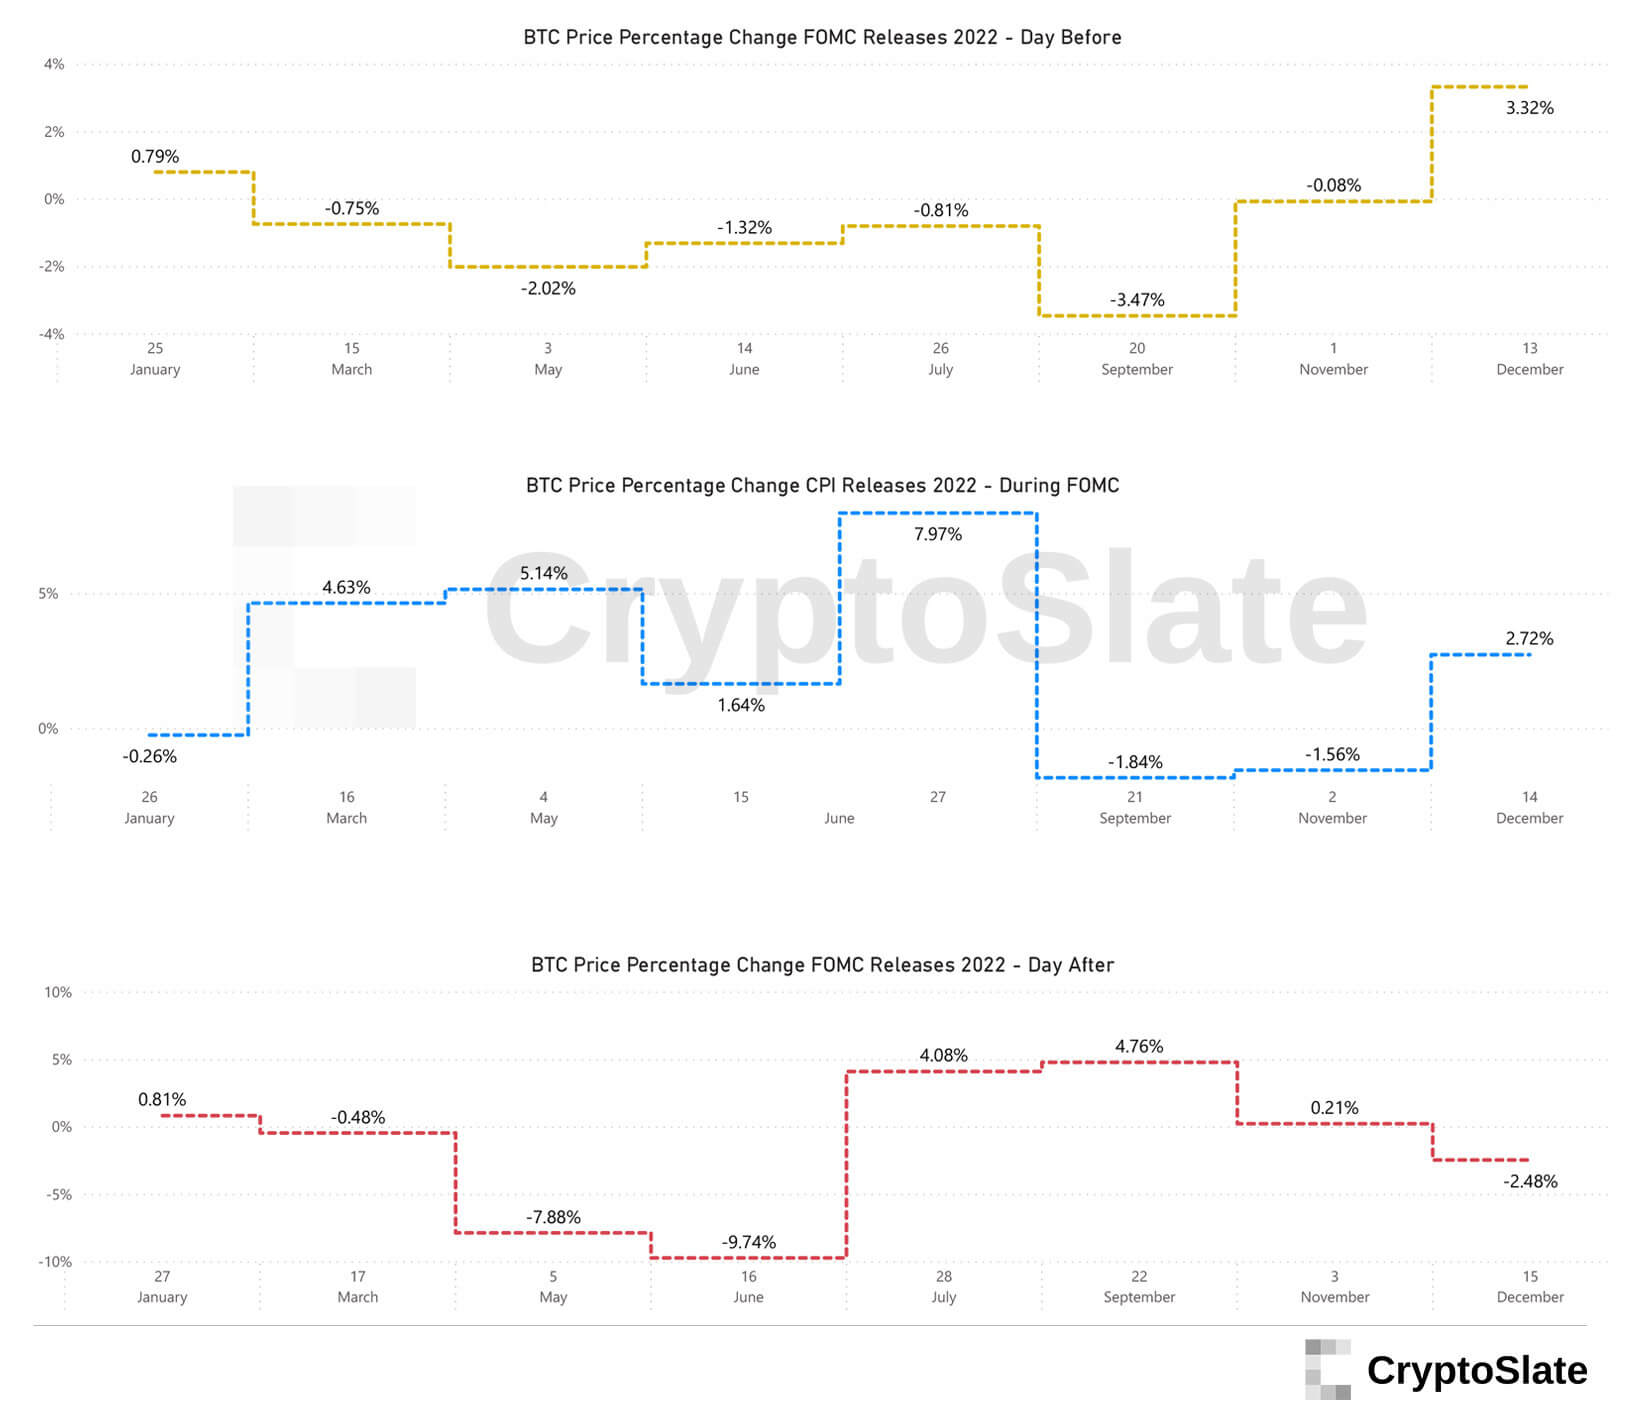 Bitcoin percentage change before, during, and after FOMC